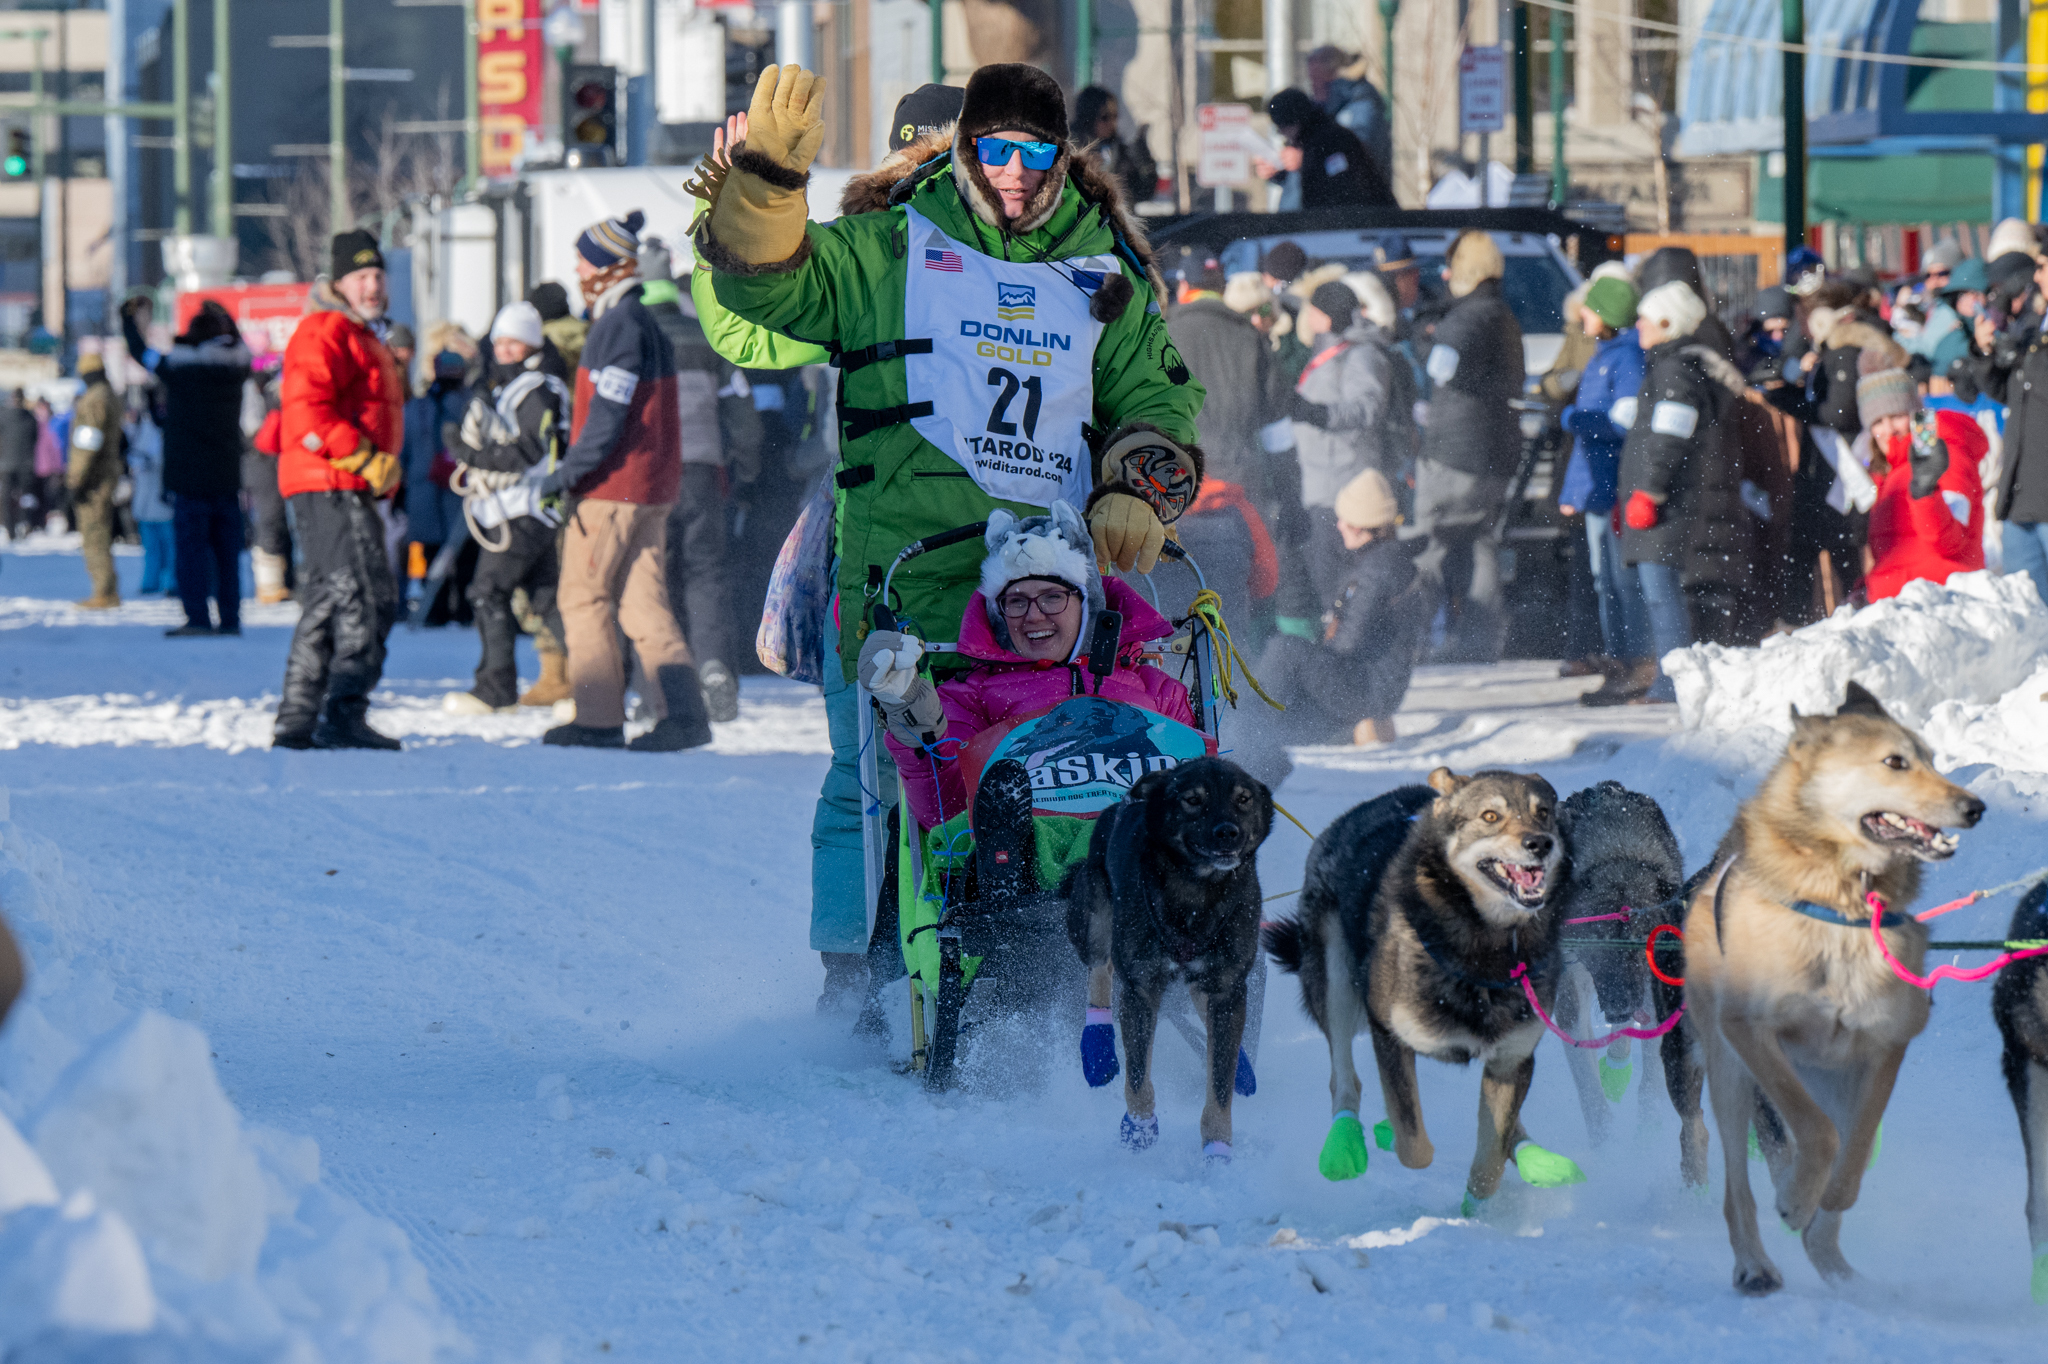 Three Iditarod champions vie for another victory, as race kicks off